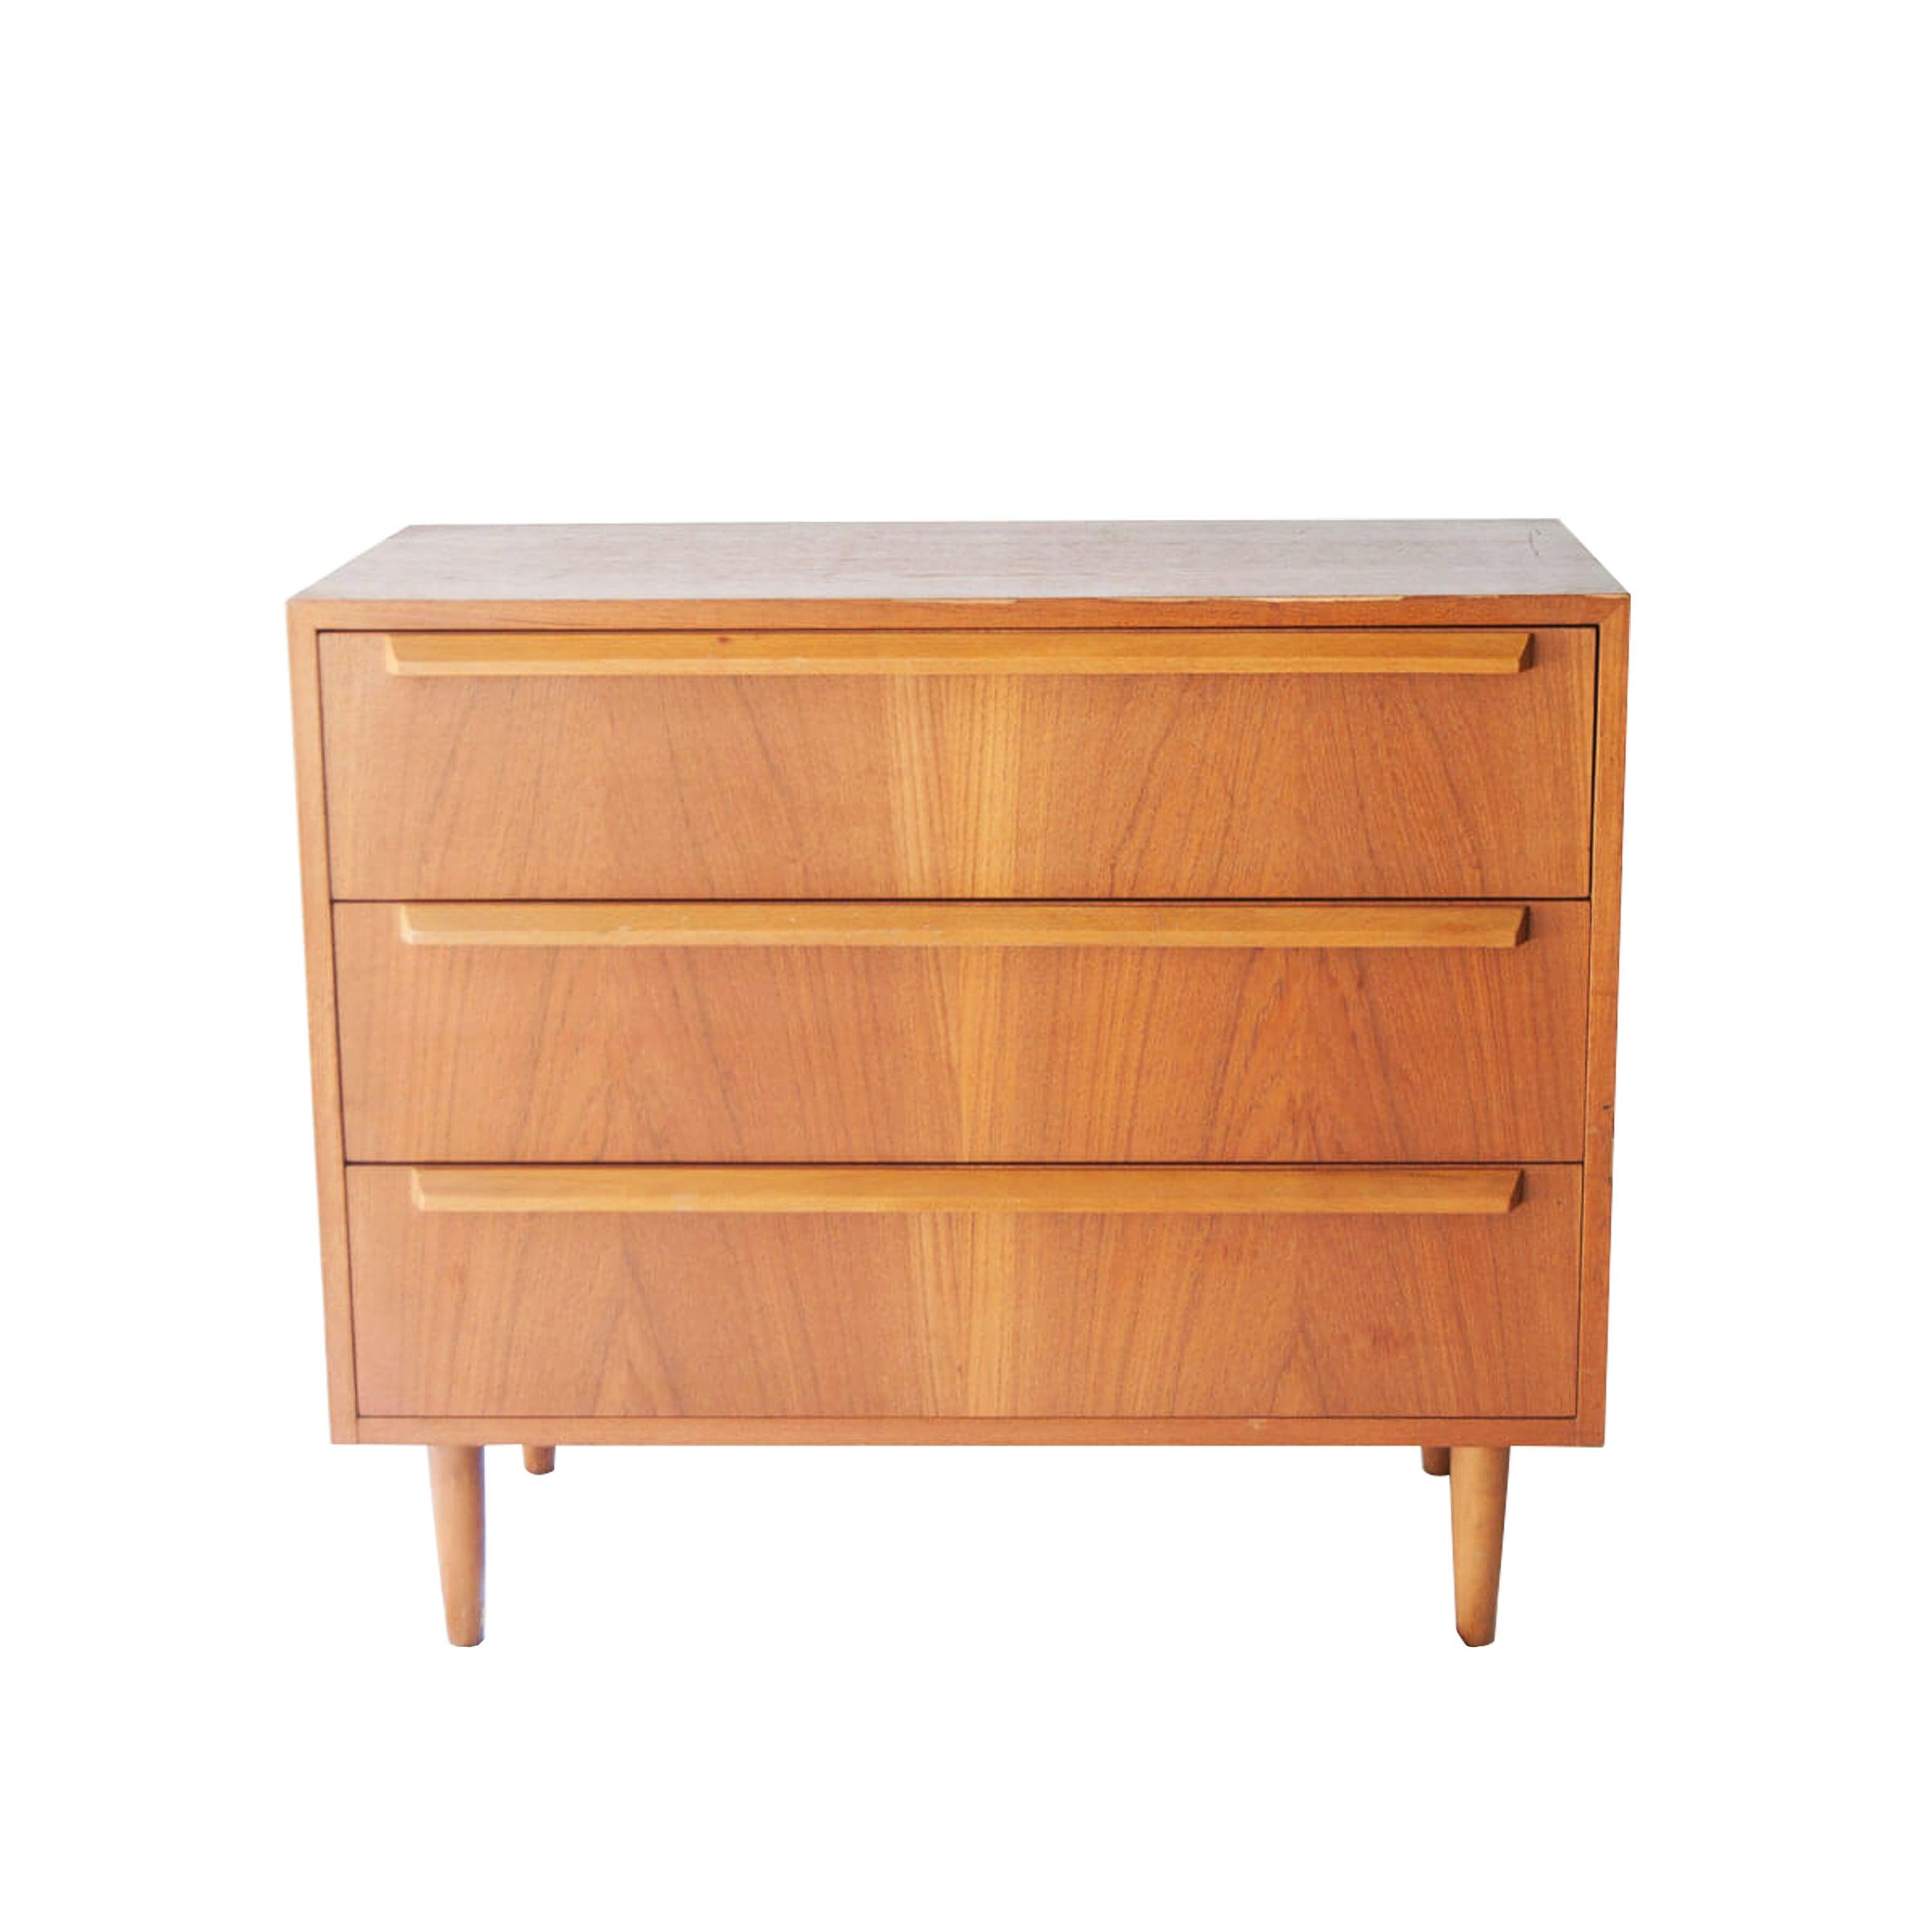 Sideboard with teak structure, three drawers and rectangular handles. Conical legs.